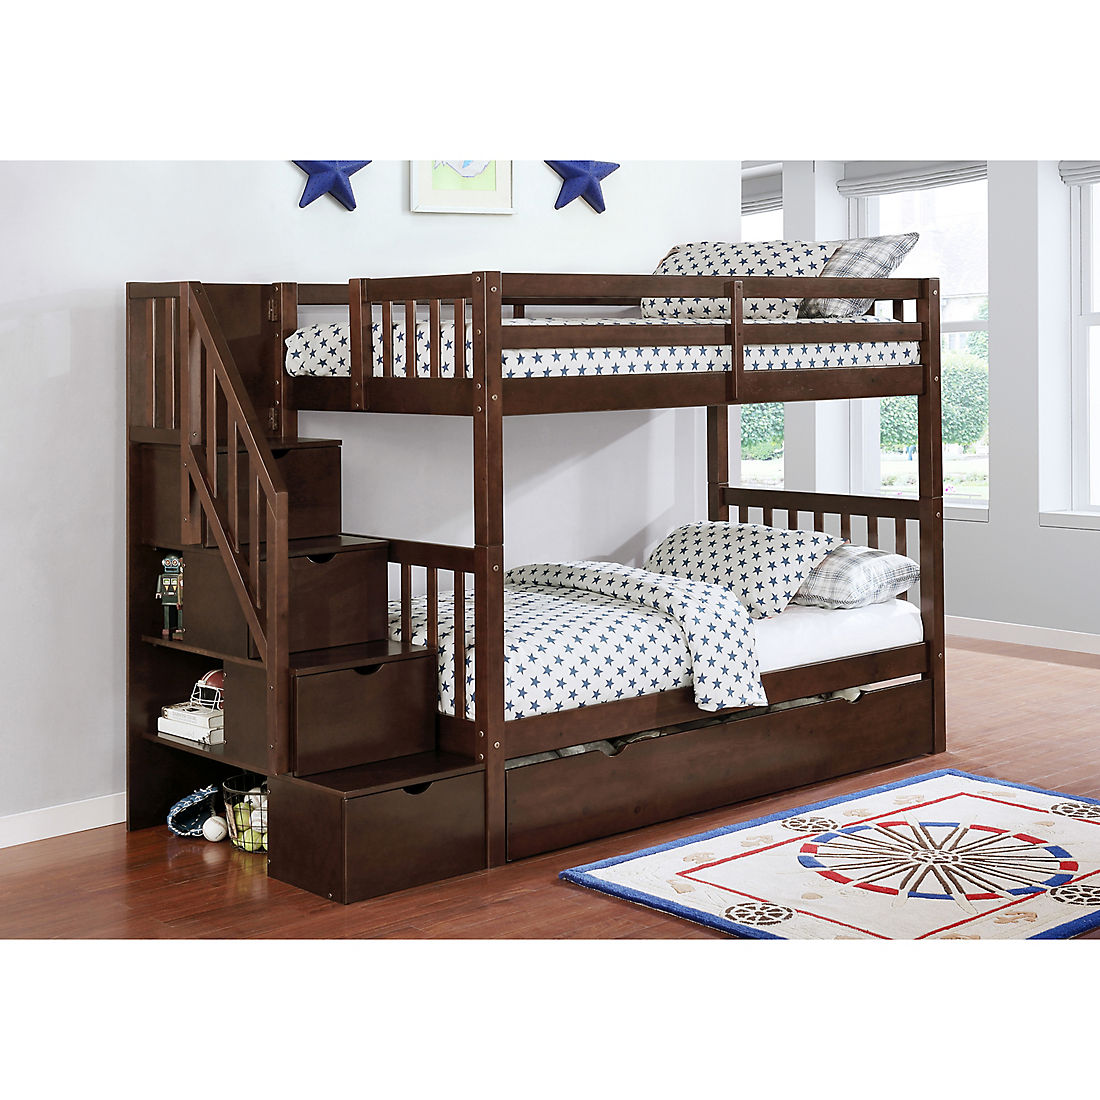 Berkley Jensen Twin Over Stairway, Twin Bunk Bed With Trundle And Storage